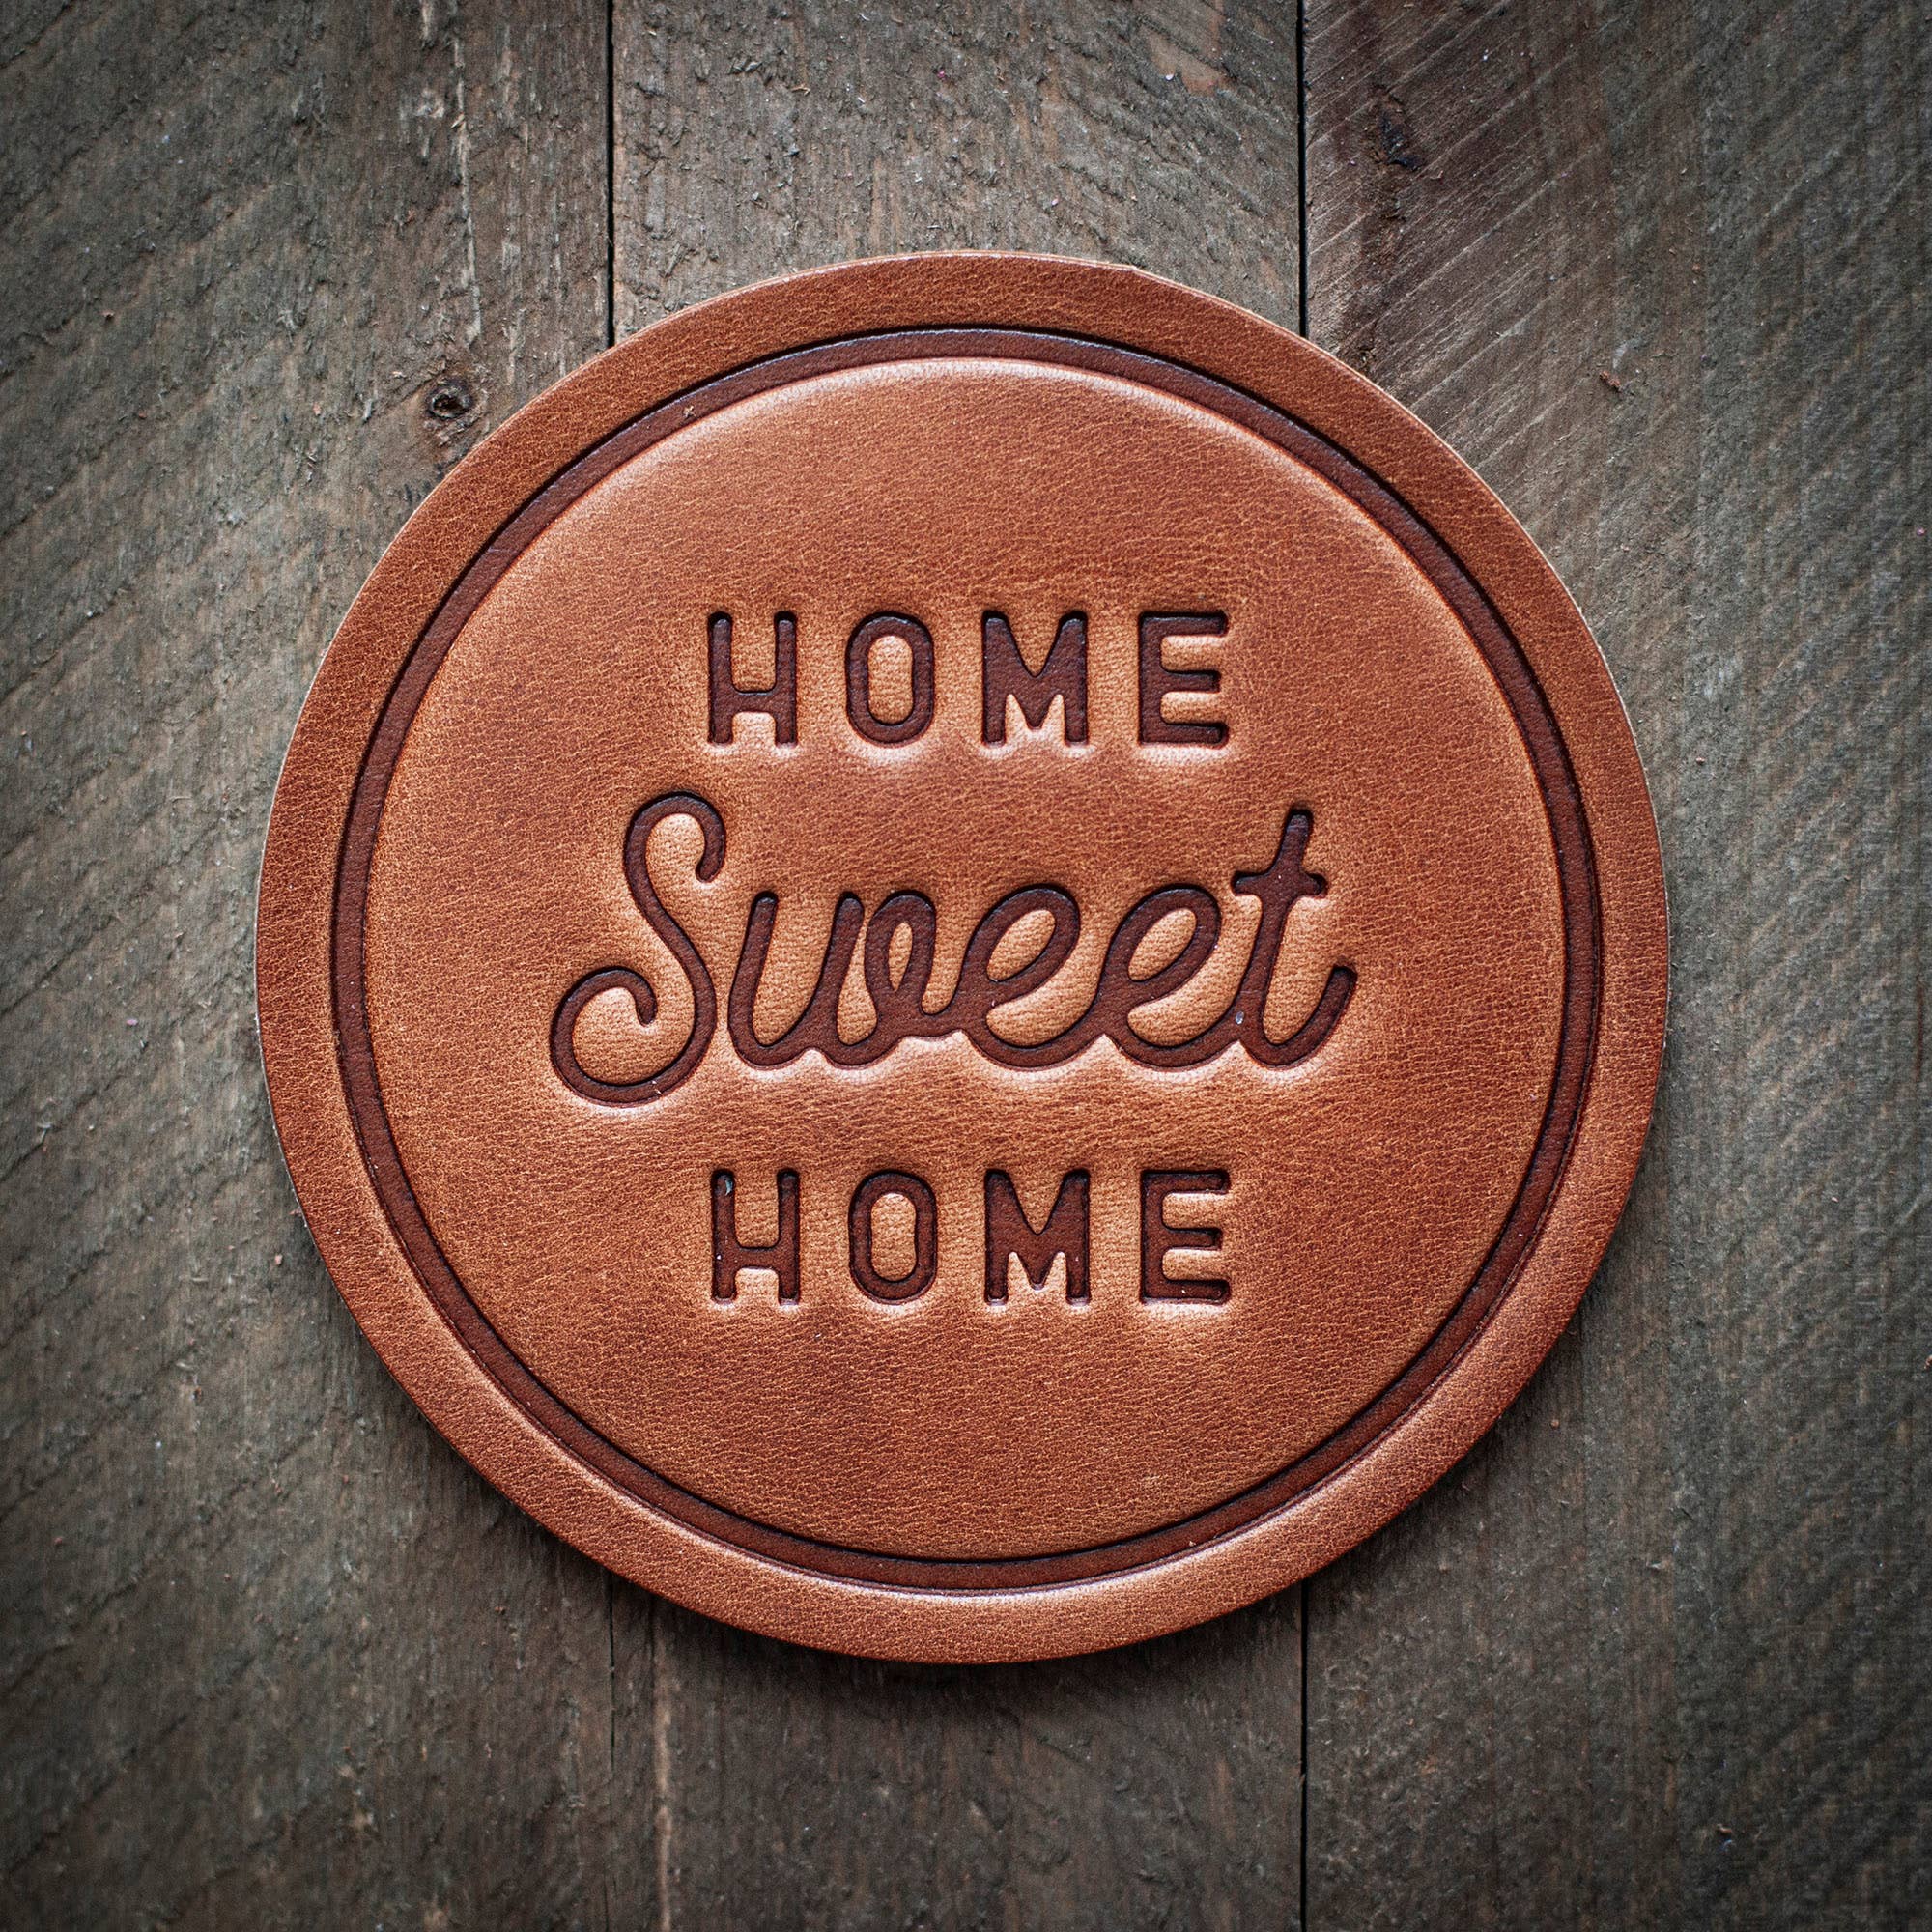 Home Sweet Home Leather Coaster